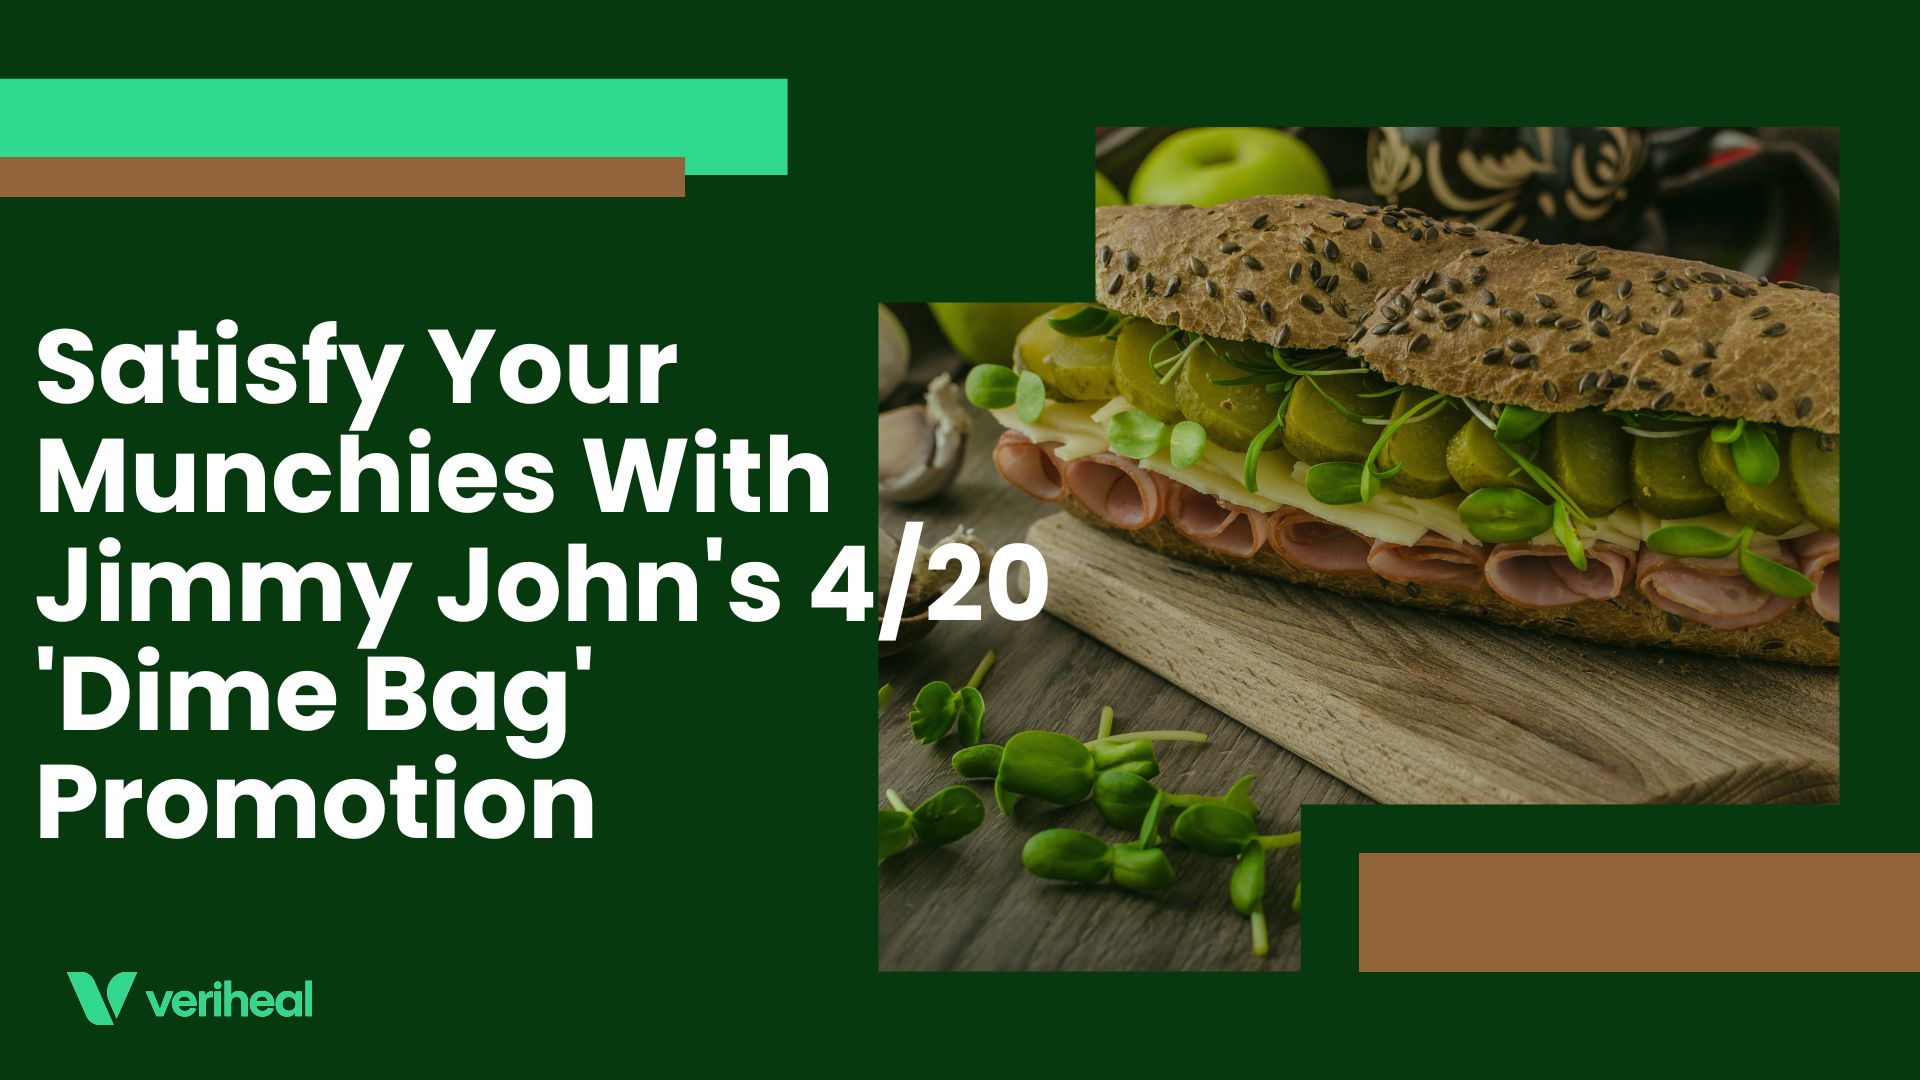 Satisfy Your Munchies With Jimmy John's 4/20 'Dime Bag' Promotion